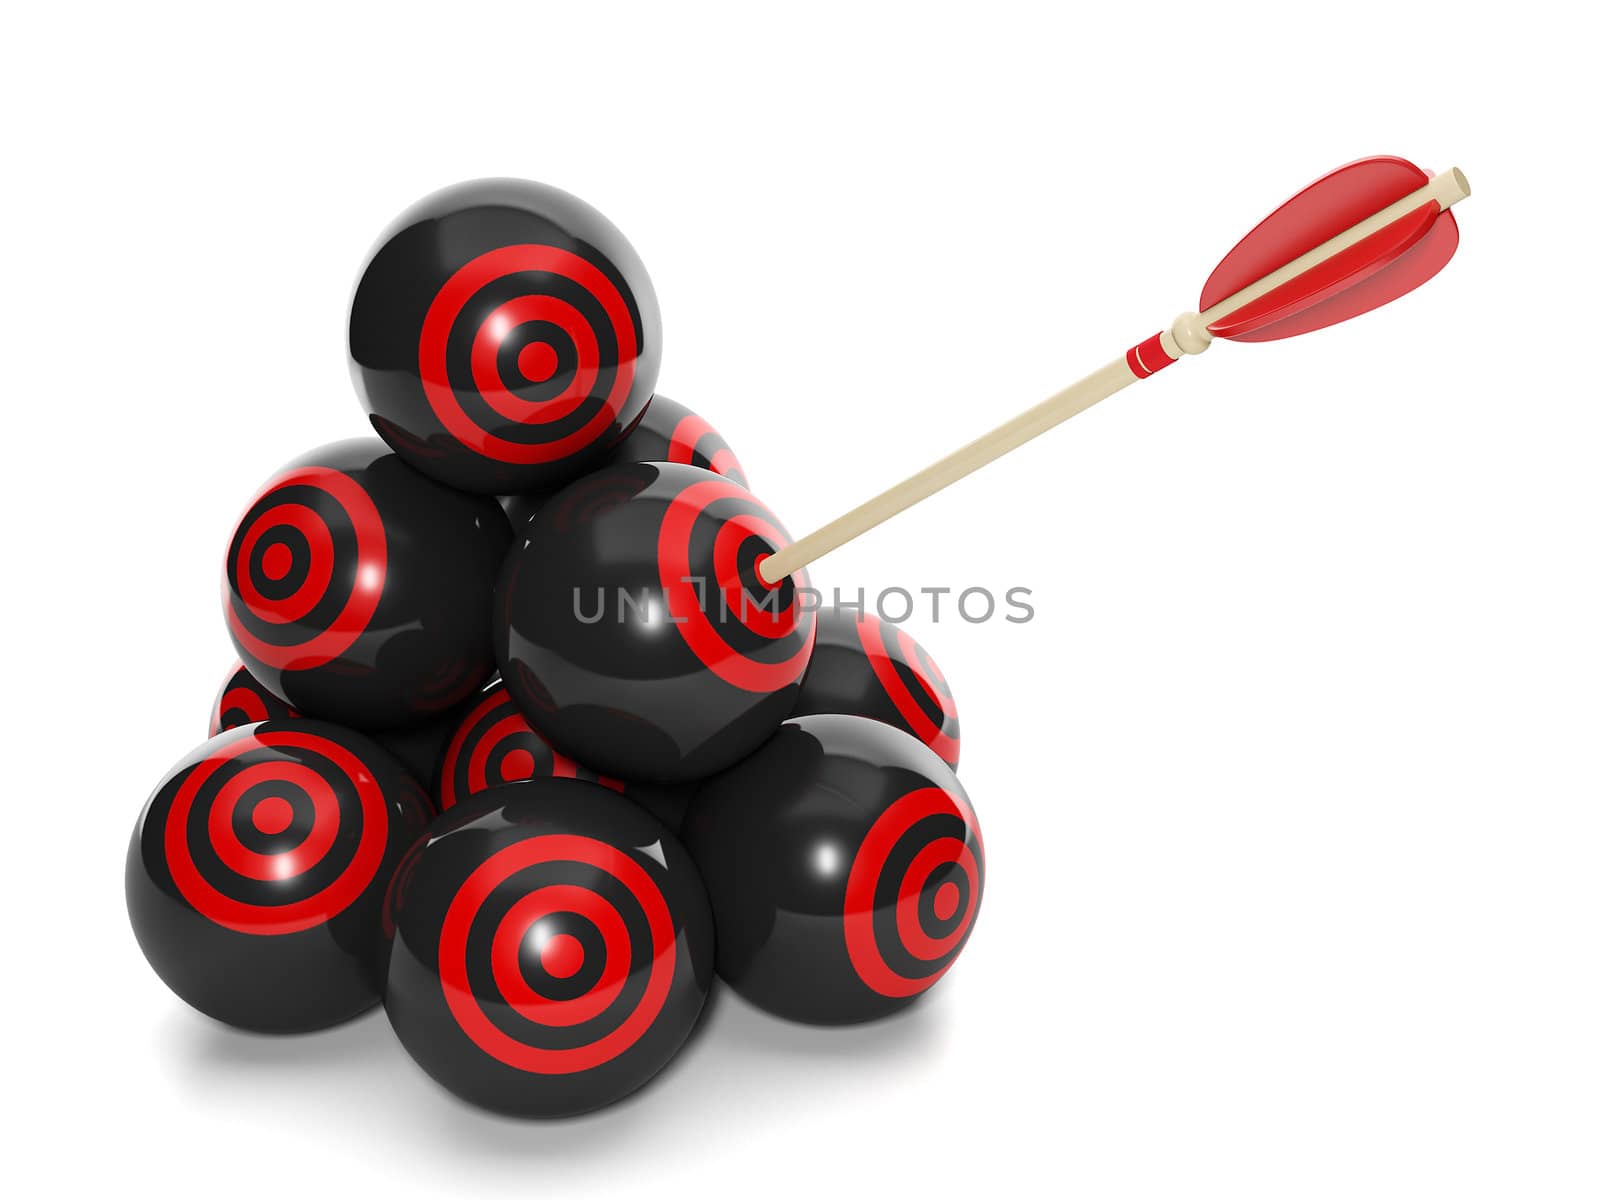 3d Illustration: Business concept. Group of balls with a target  by kolobsek